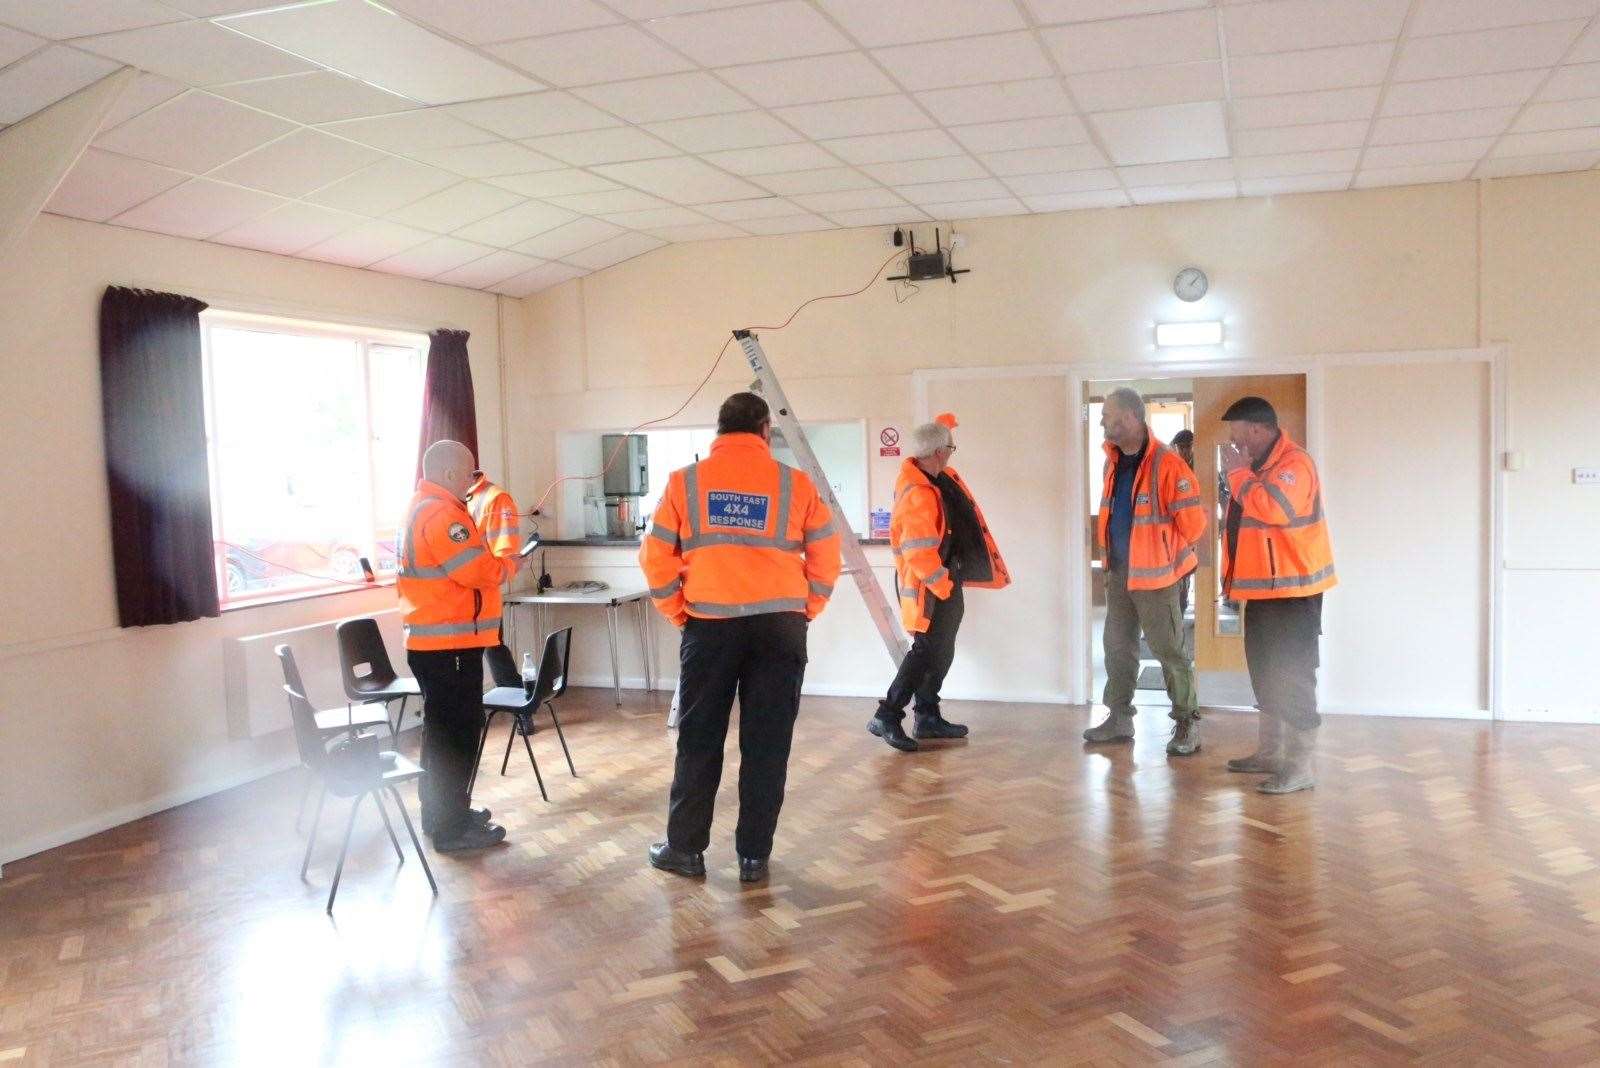 Volunteers from South East 4x4 Response at a control centre set up in Yalding village hall. Picture: UKNIP